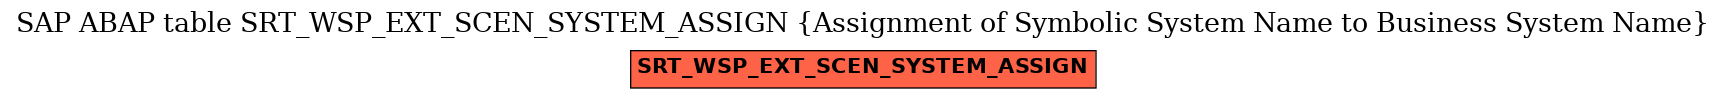 E-R Diagram for table SRT_WSP_EXT_SCEN_SYSTEM_ASSIGN (Assignment of Symbolic System Name to Business System Name)